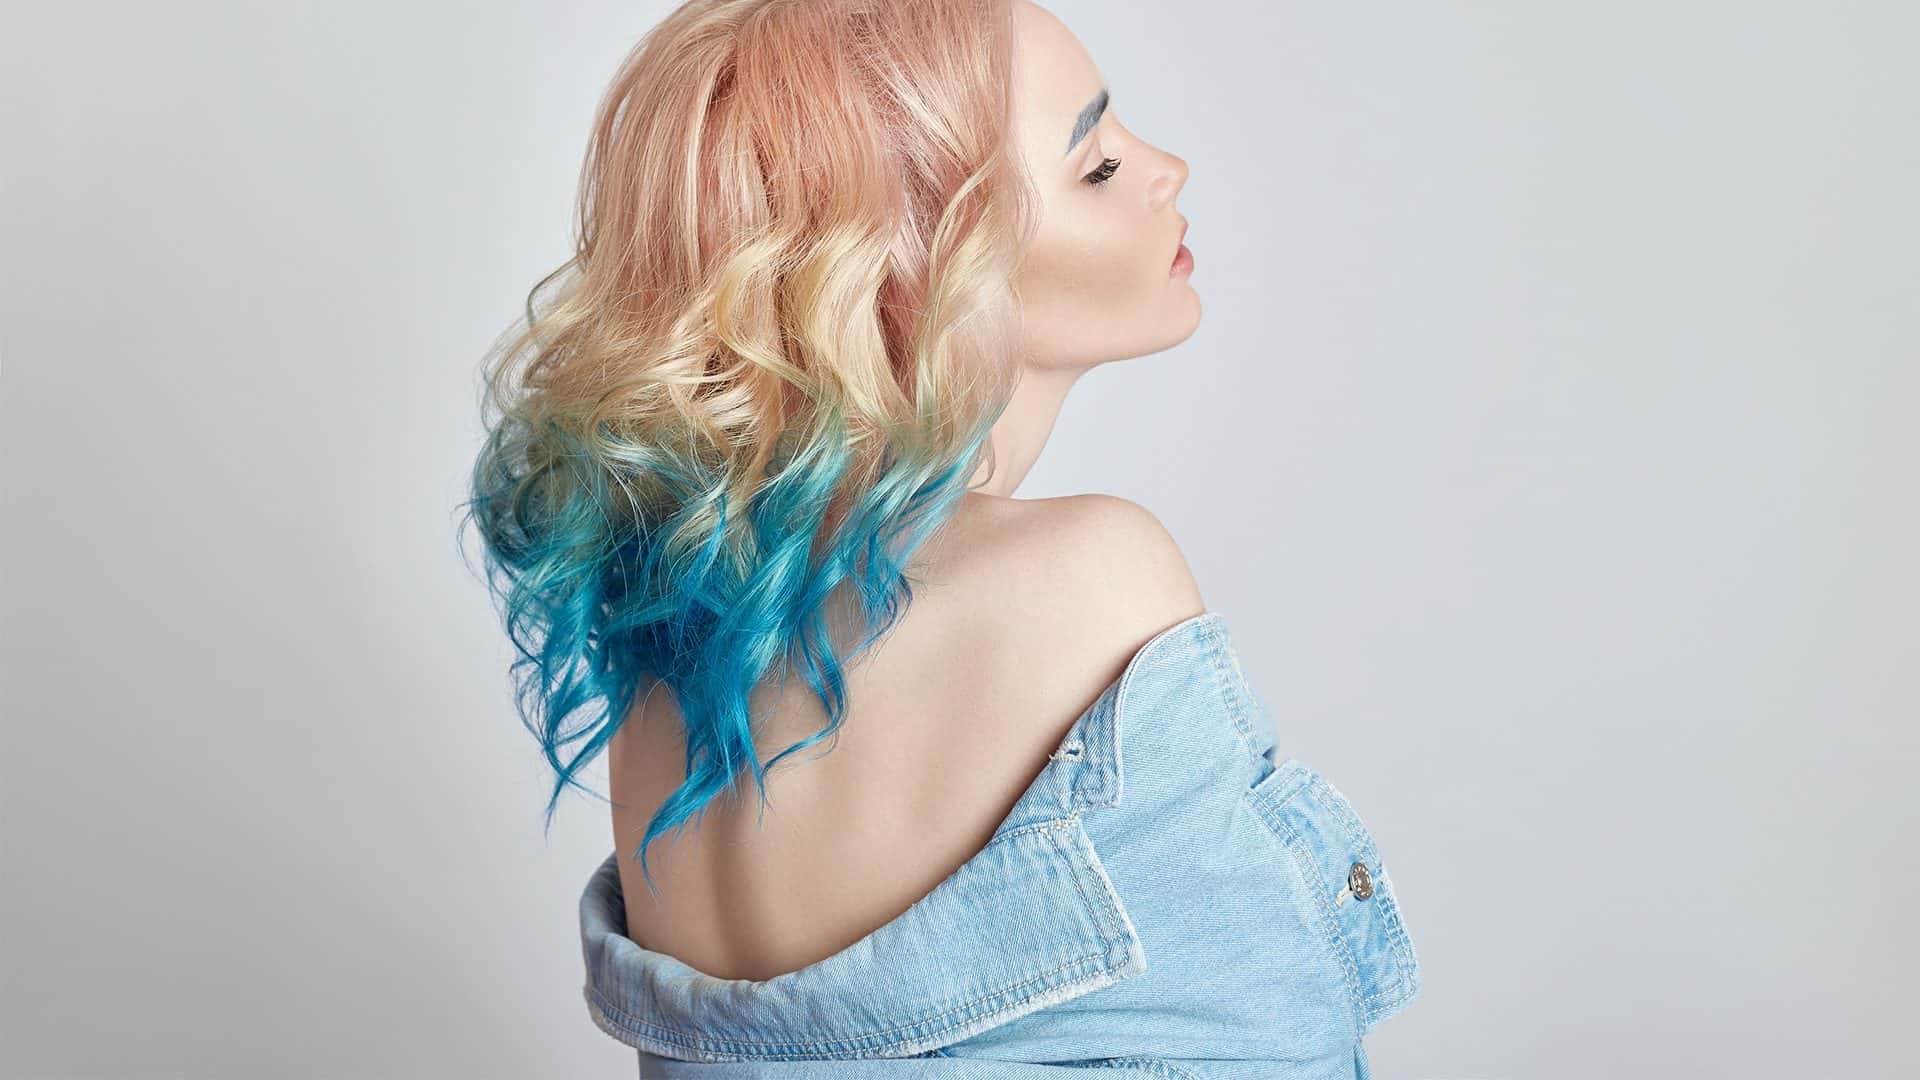 From Blue Dip-Dye To Blonde Ombré Hair